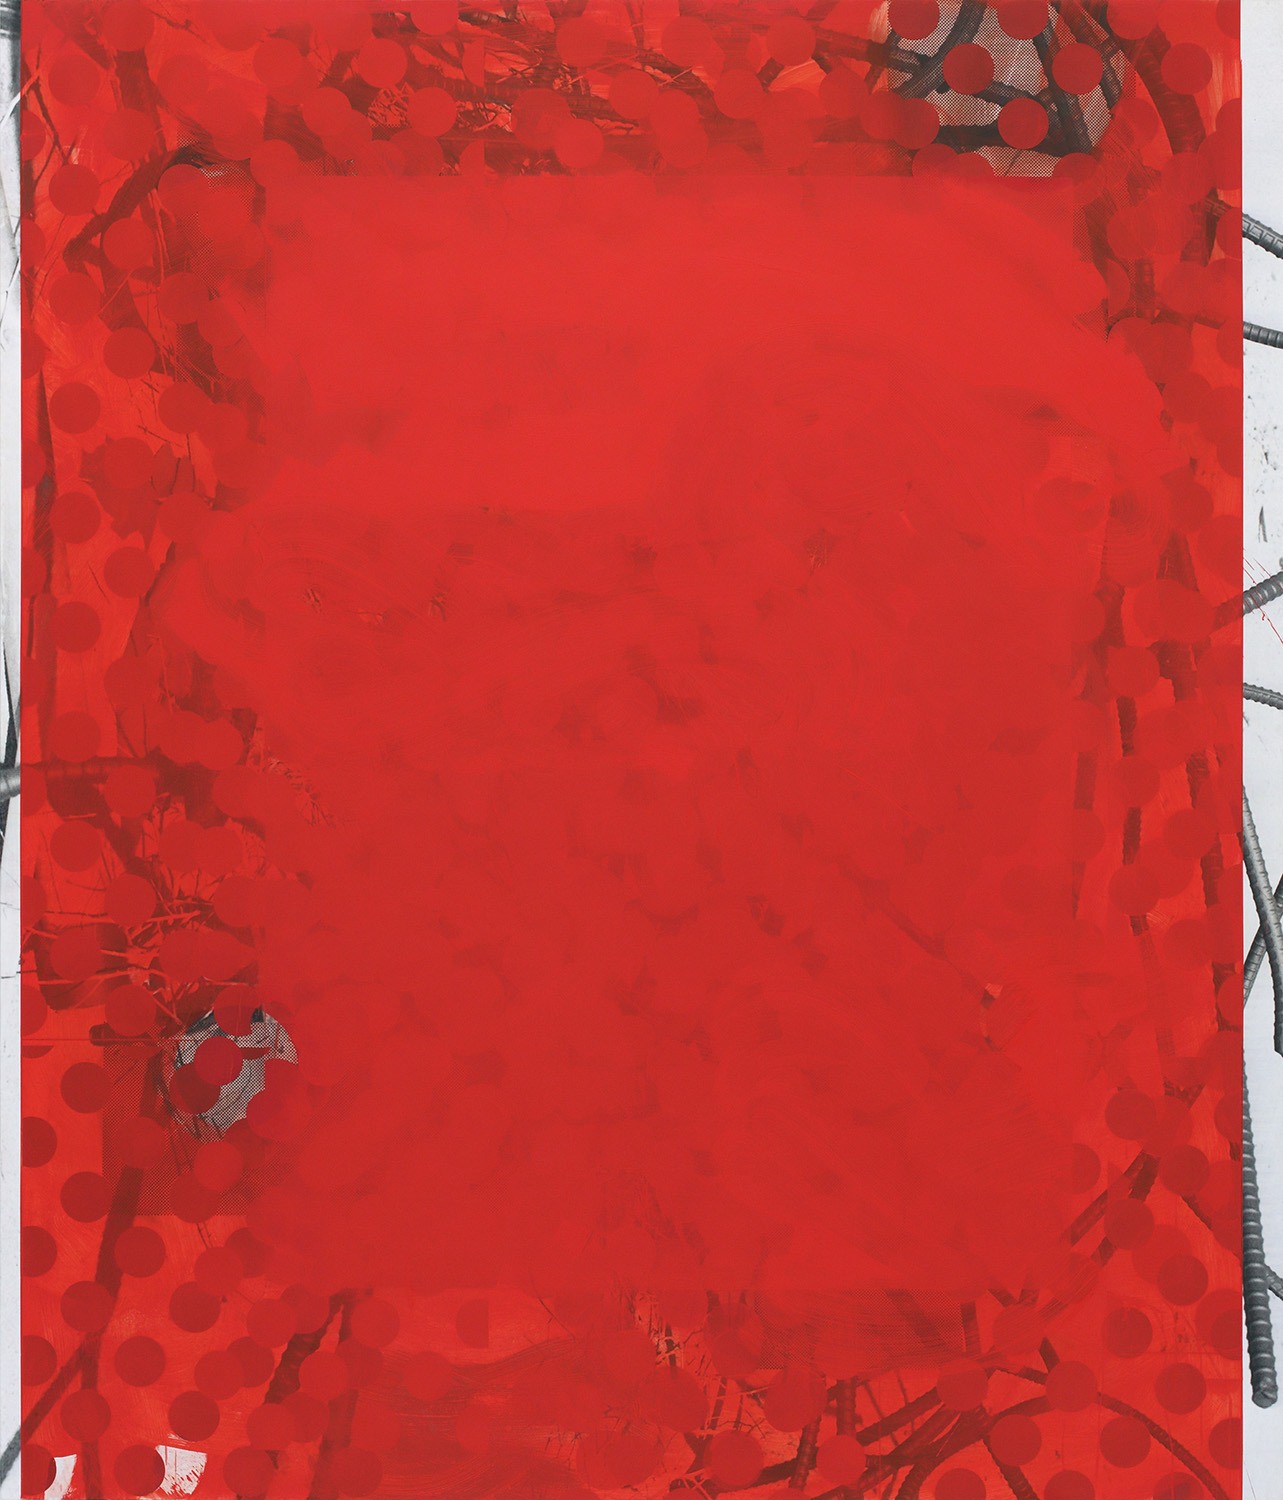  Red Wedding, 2014  Oil and UV cured ink on canvas over panel  84 x 72 inches  213.36 x 182.88 cm       